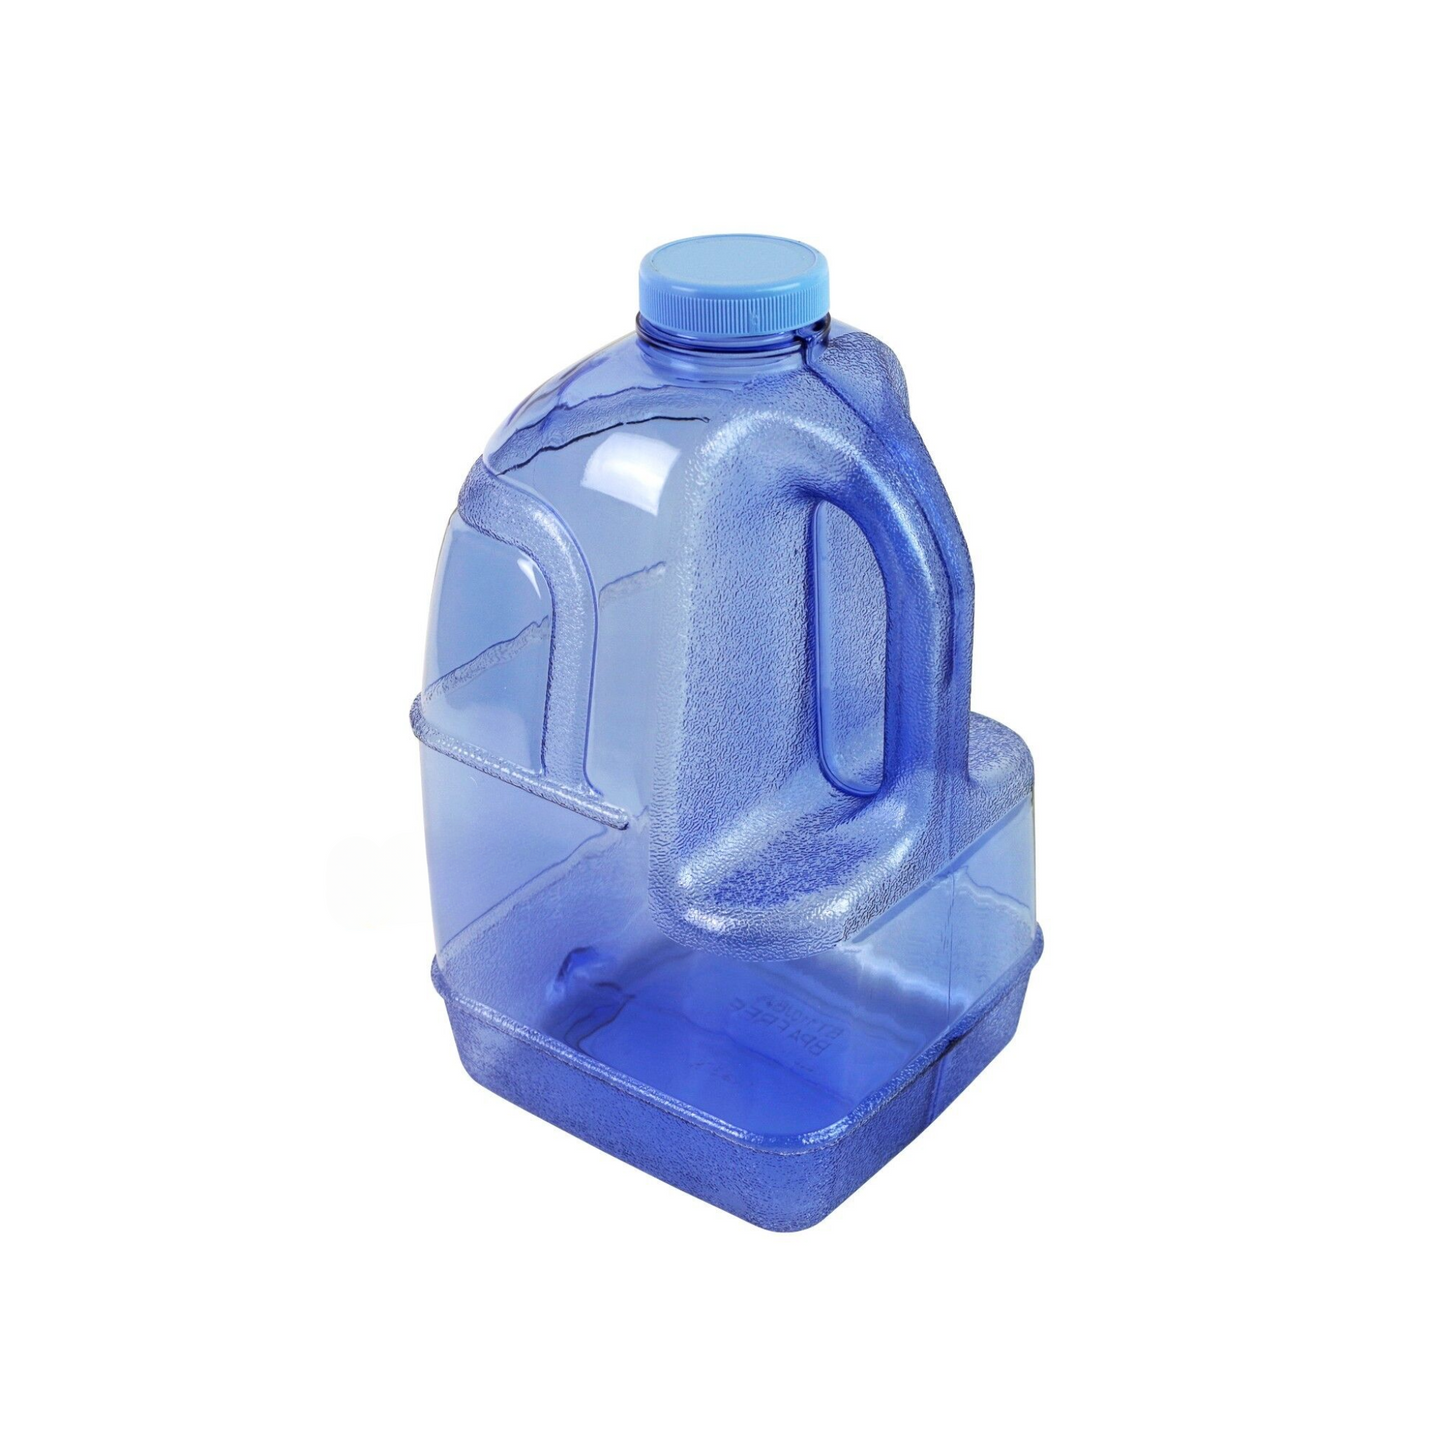 1-gallon blue plastic jug for water storage and dispensing, made with BPA-free materials and featuring a built-in handle